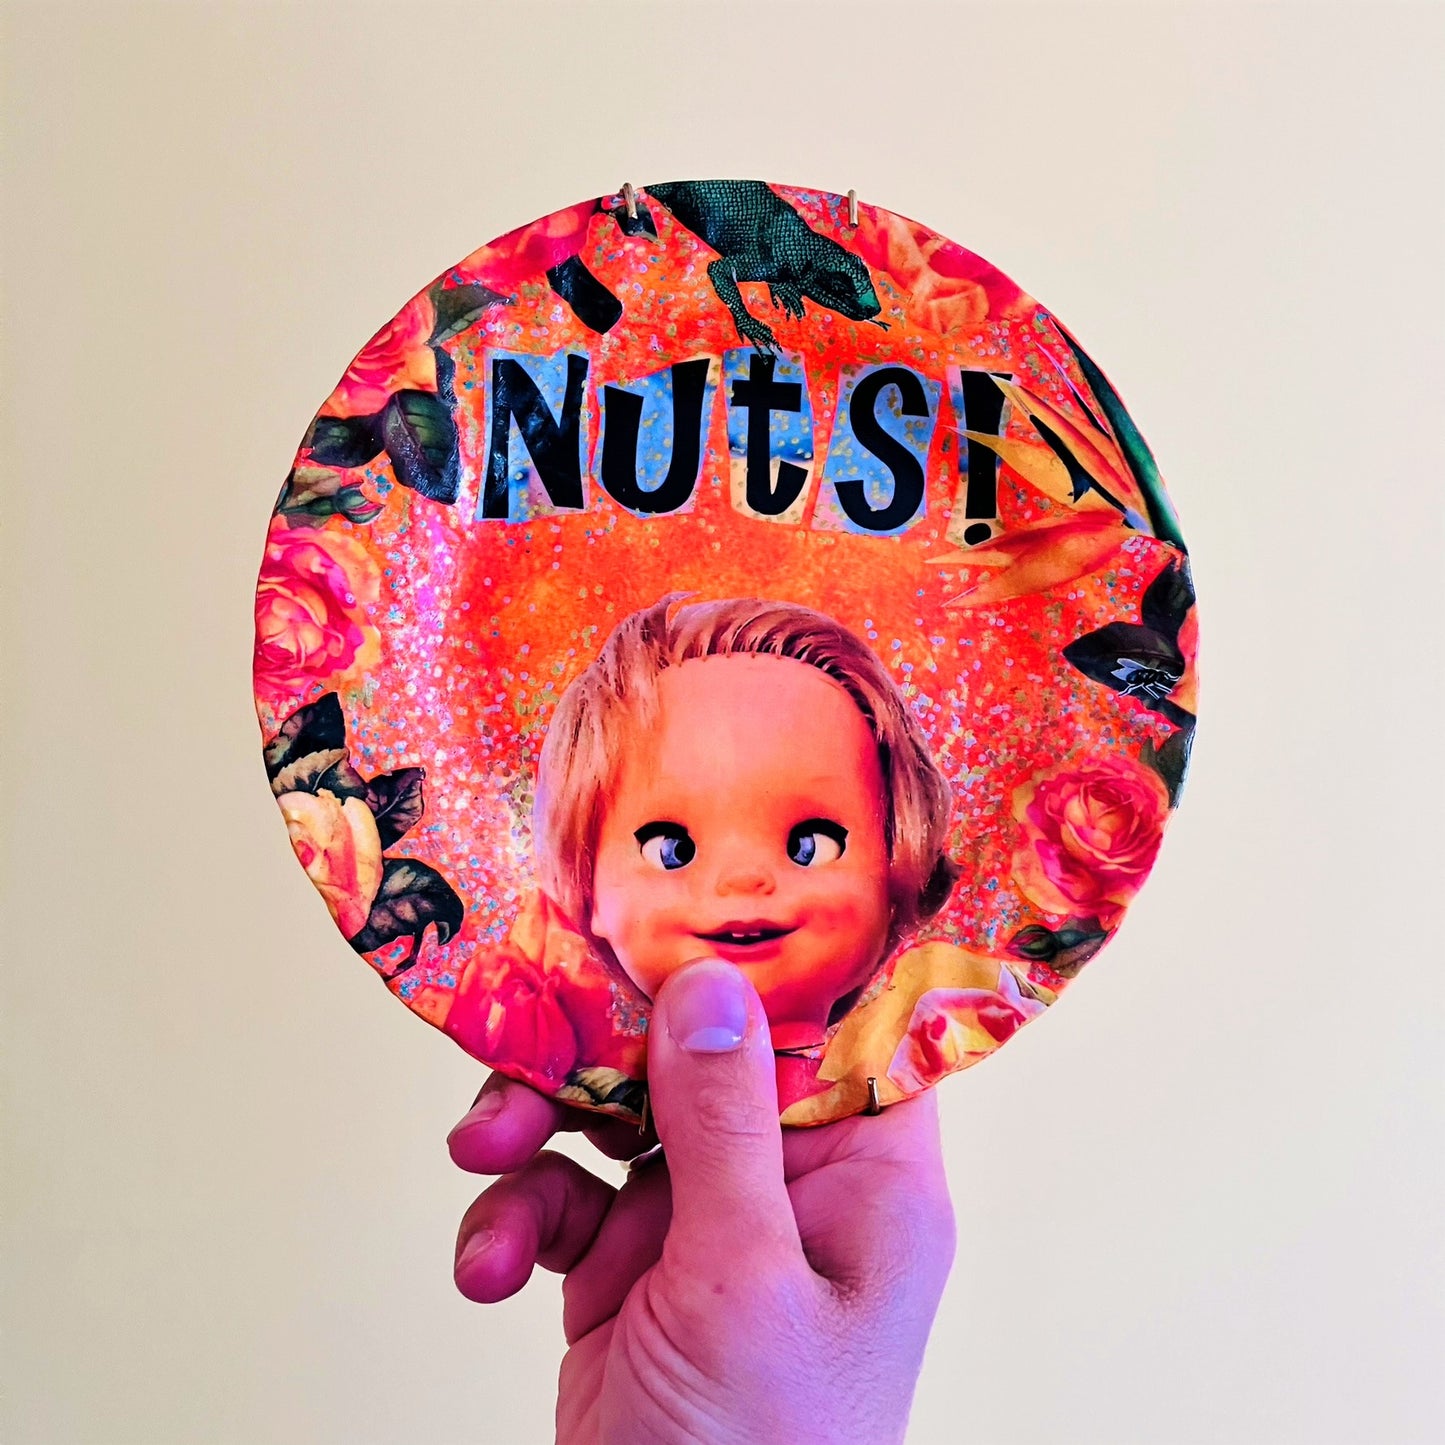 Orange Upcycled Wall Plate - "Nuts" - by House of Frisson